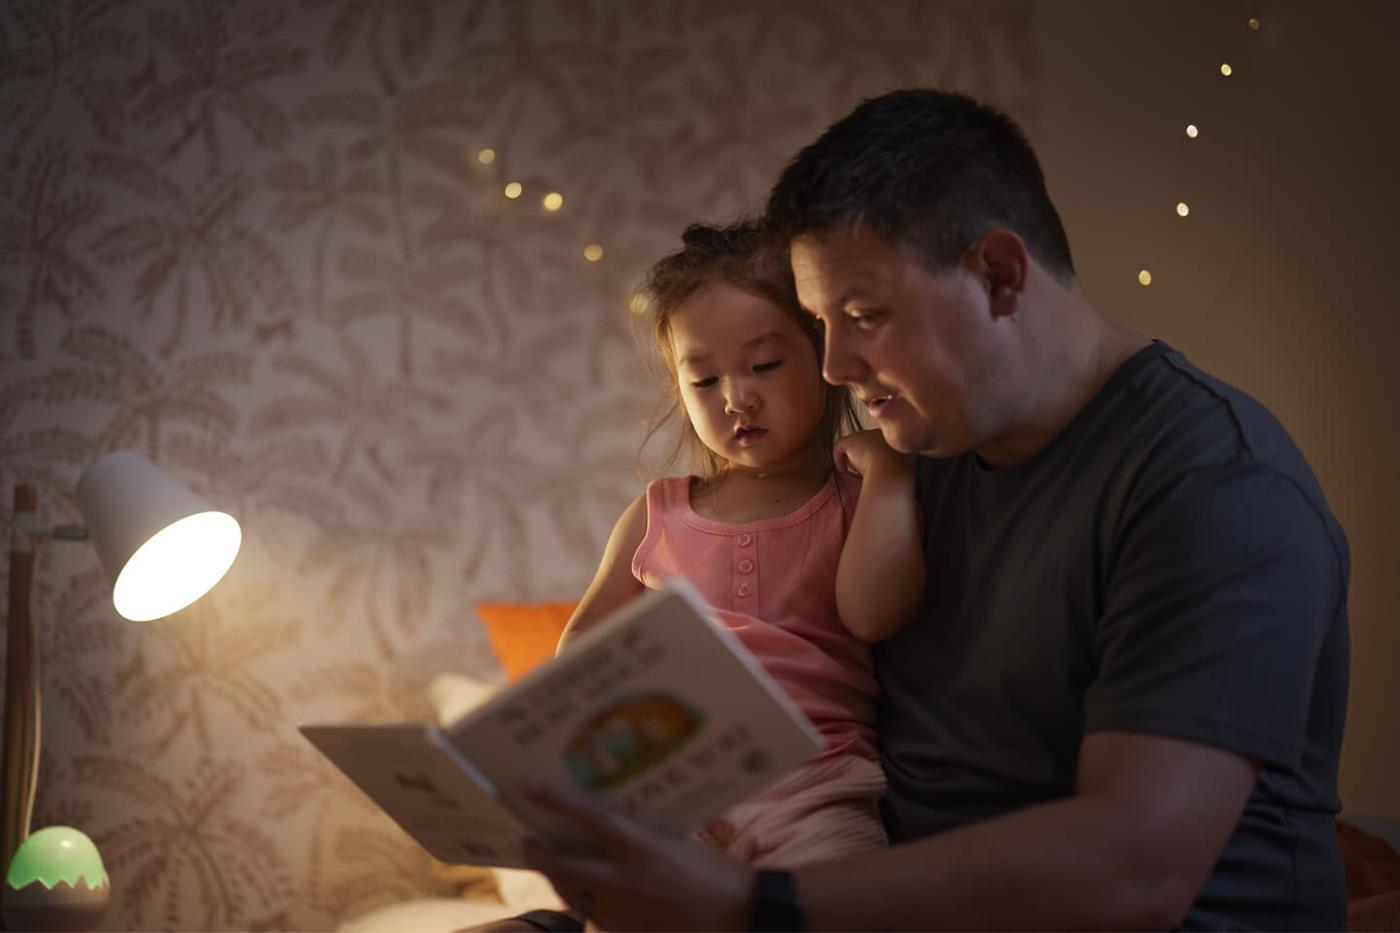 Dad reading to child at night